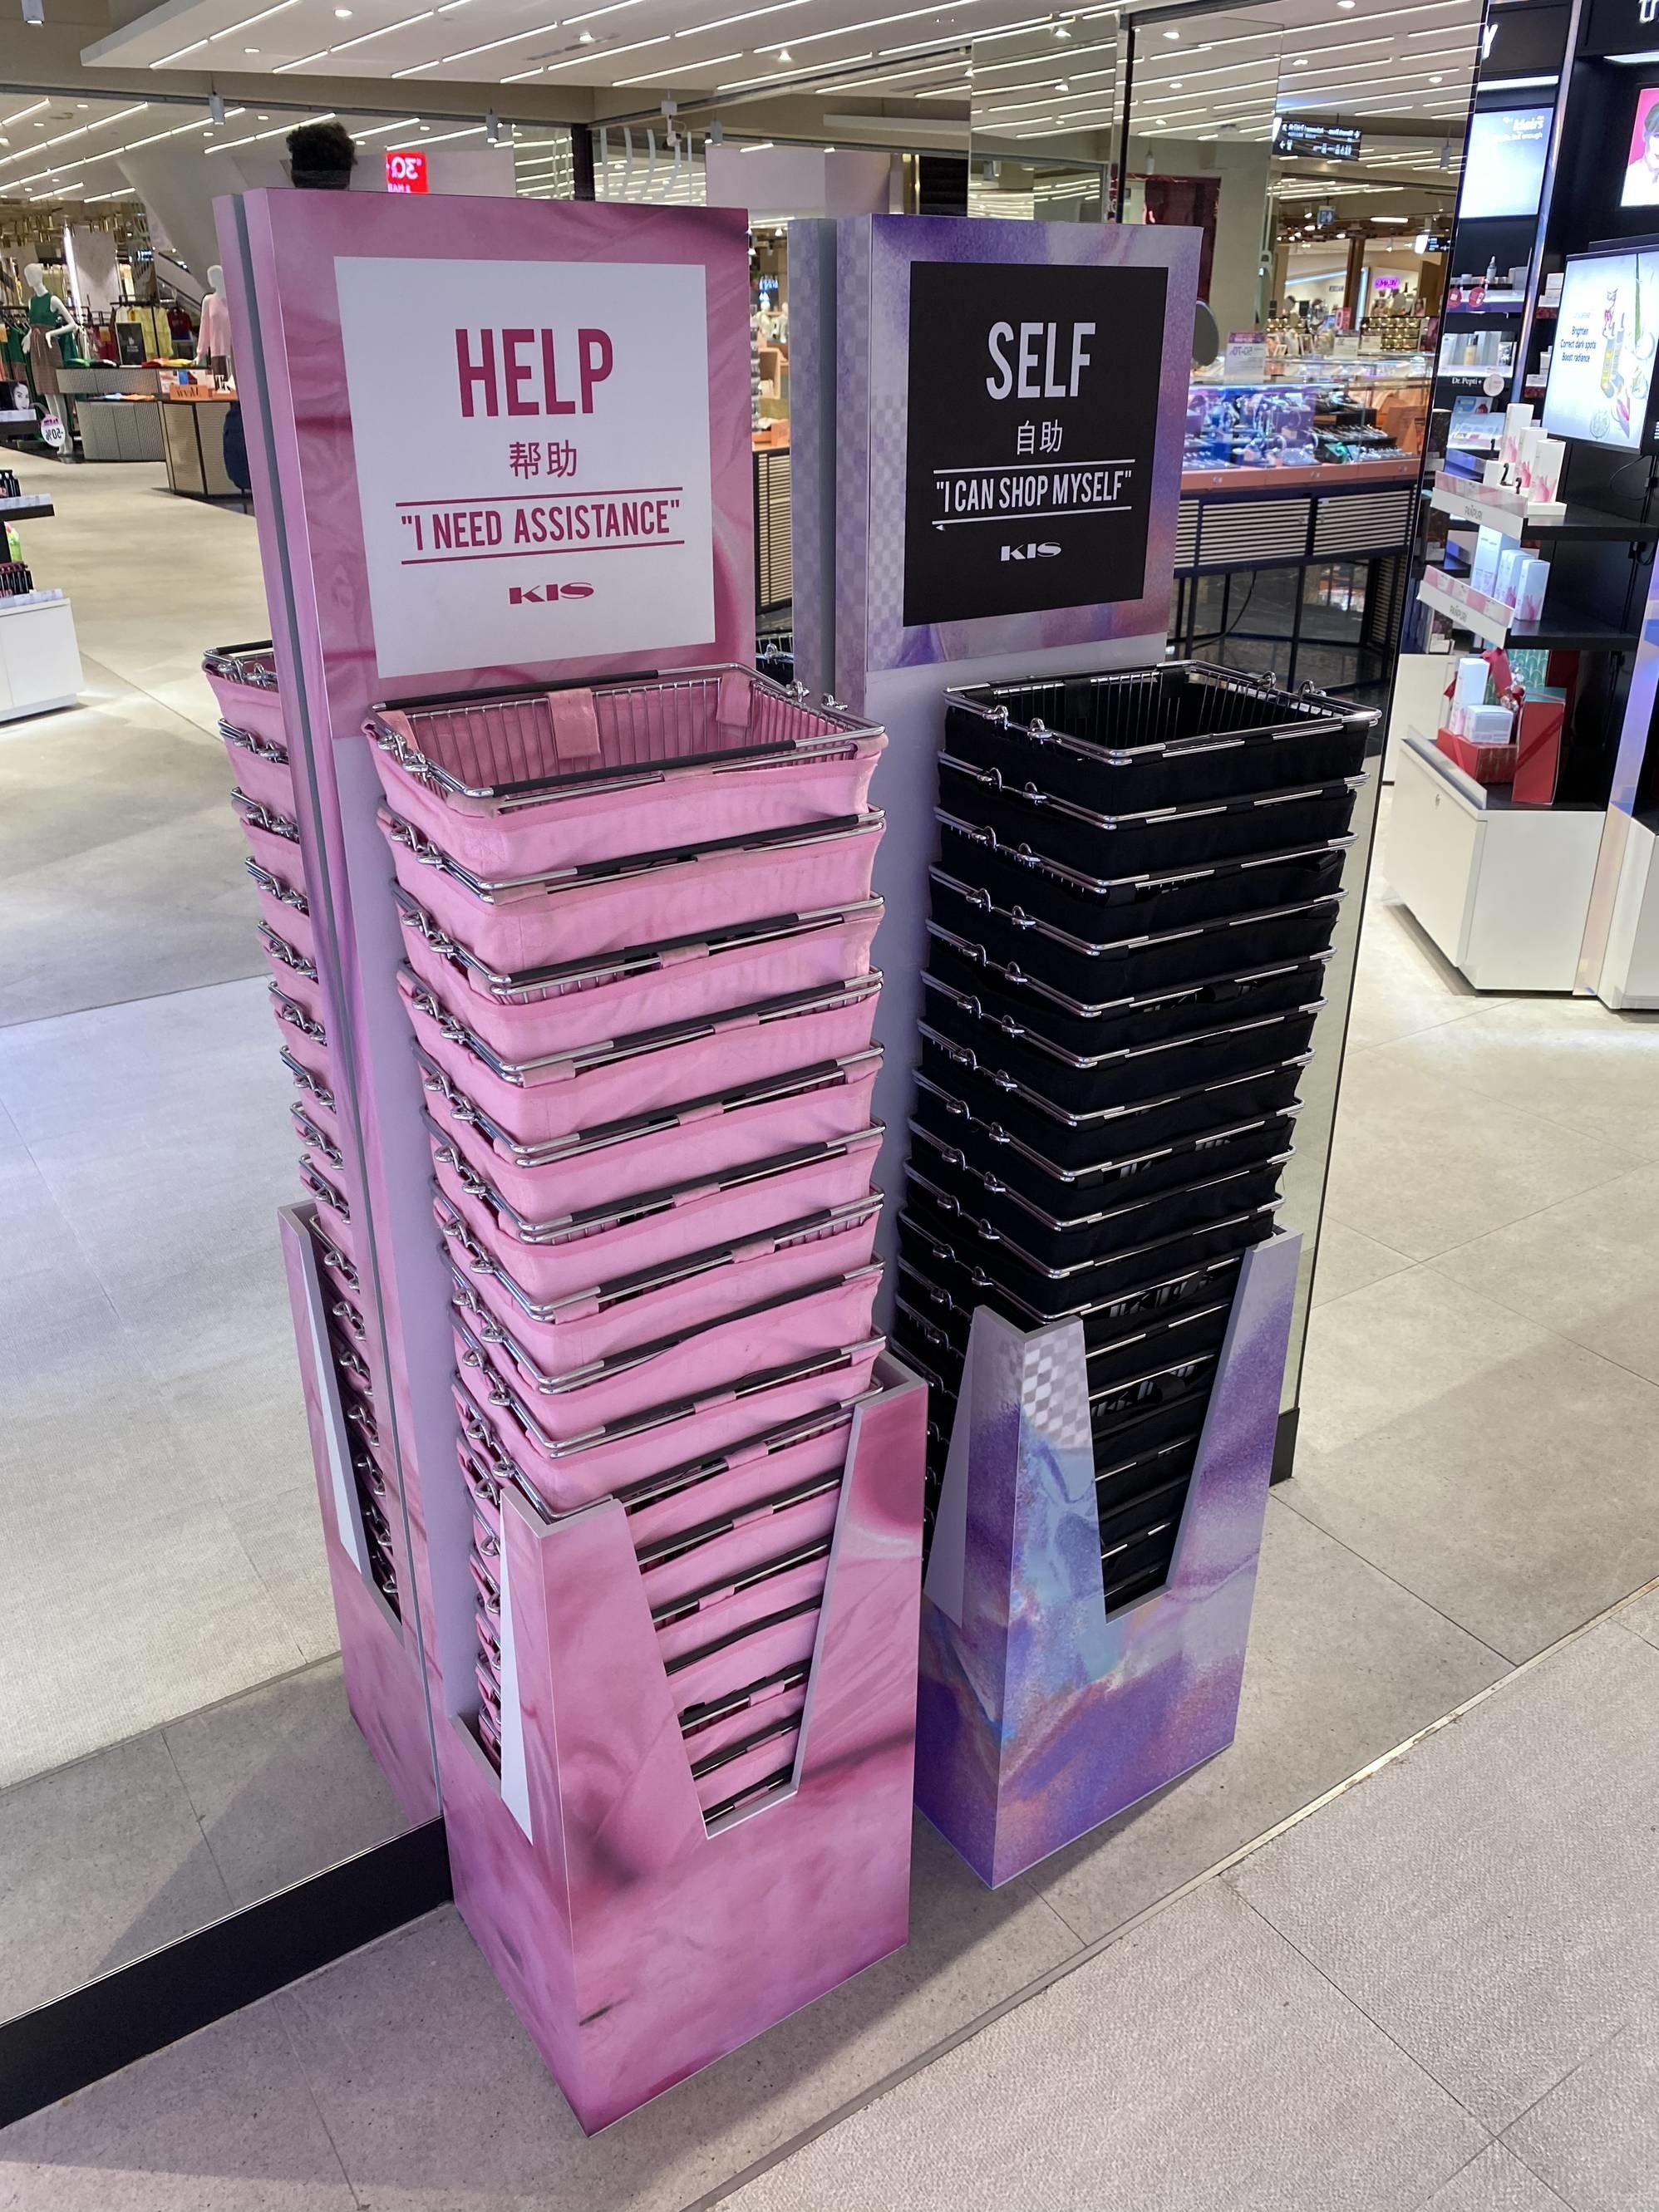 Pink shopping baskets that say I need assistance and black baskets that say I can shop myself